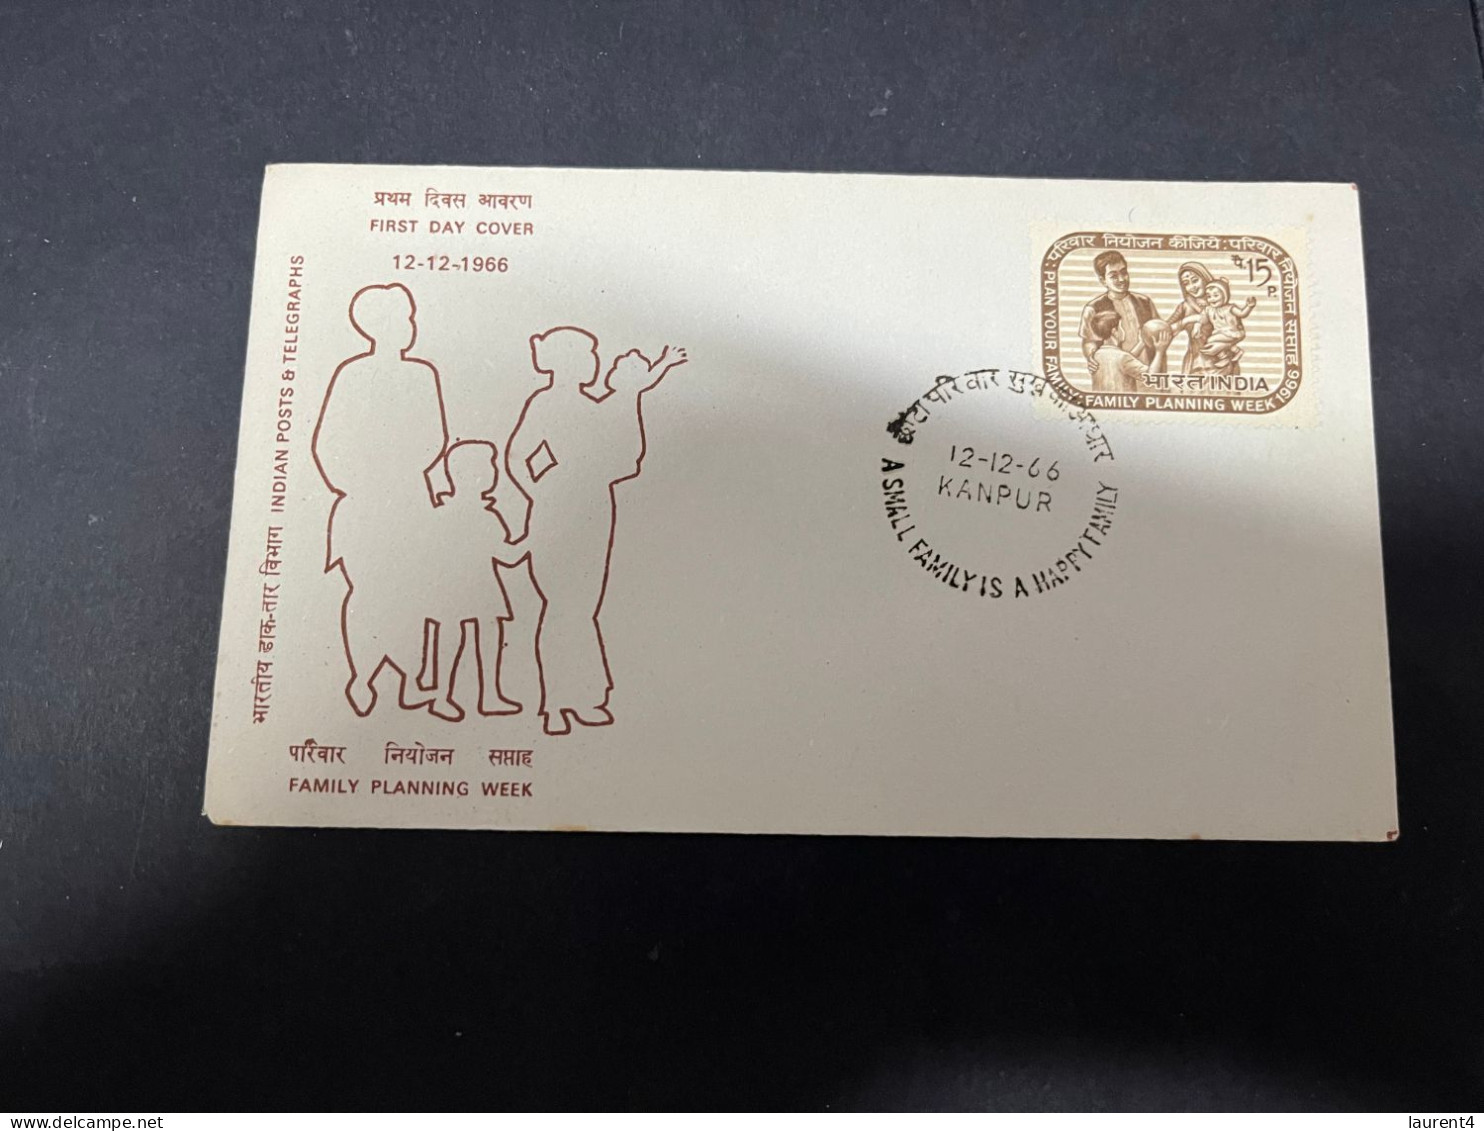 12-5-2024 (4 Z 49) INDIA FDC Cover - 1966 - Family Planning Week - FDC